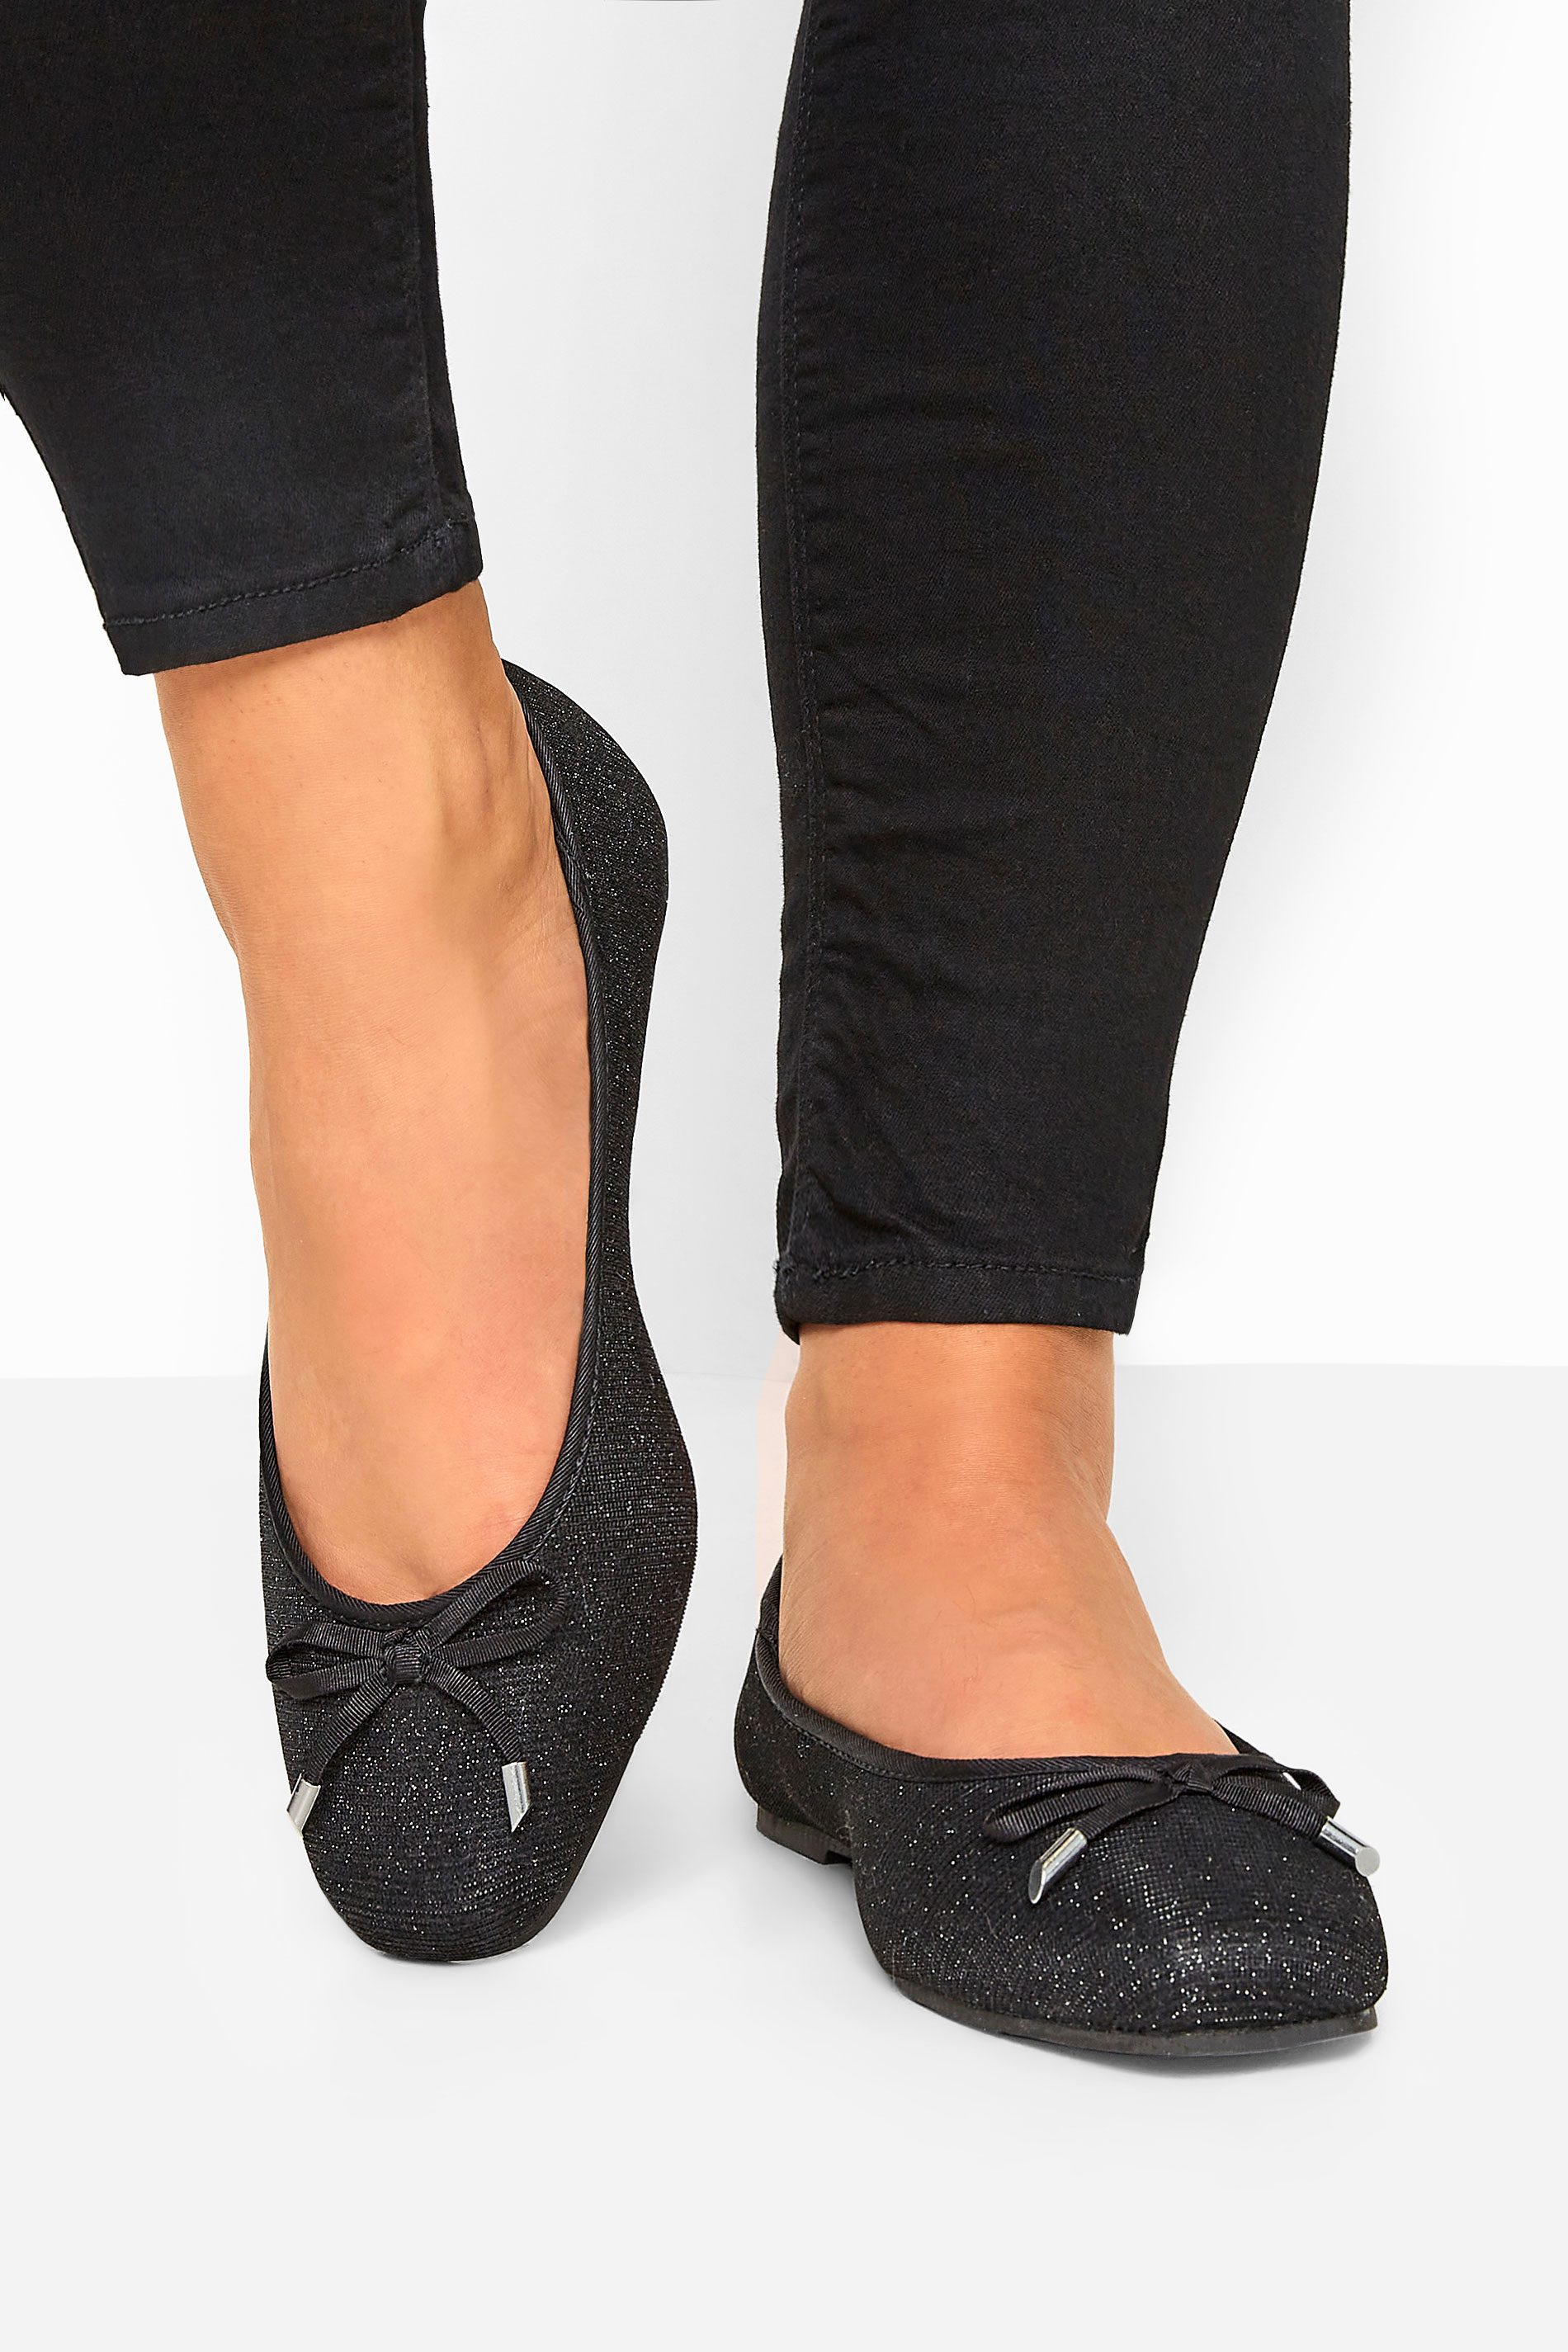 Black Glitter Bow Ballerina Pumps In Extra Wide Fit | Yours Clothing